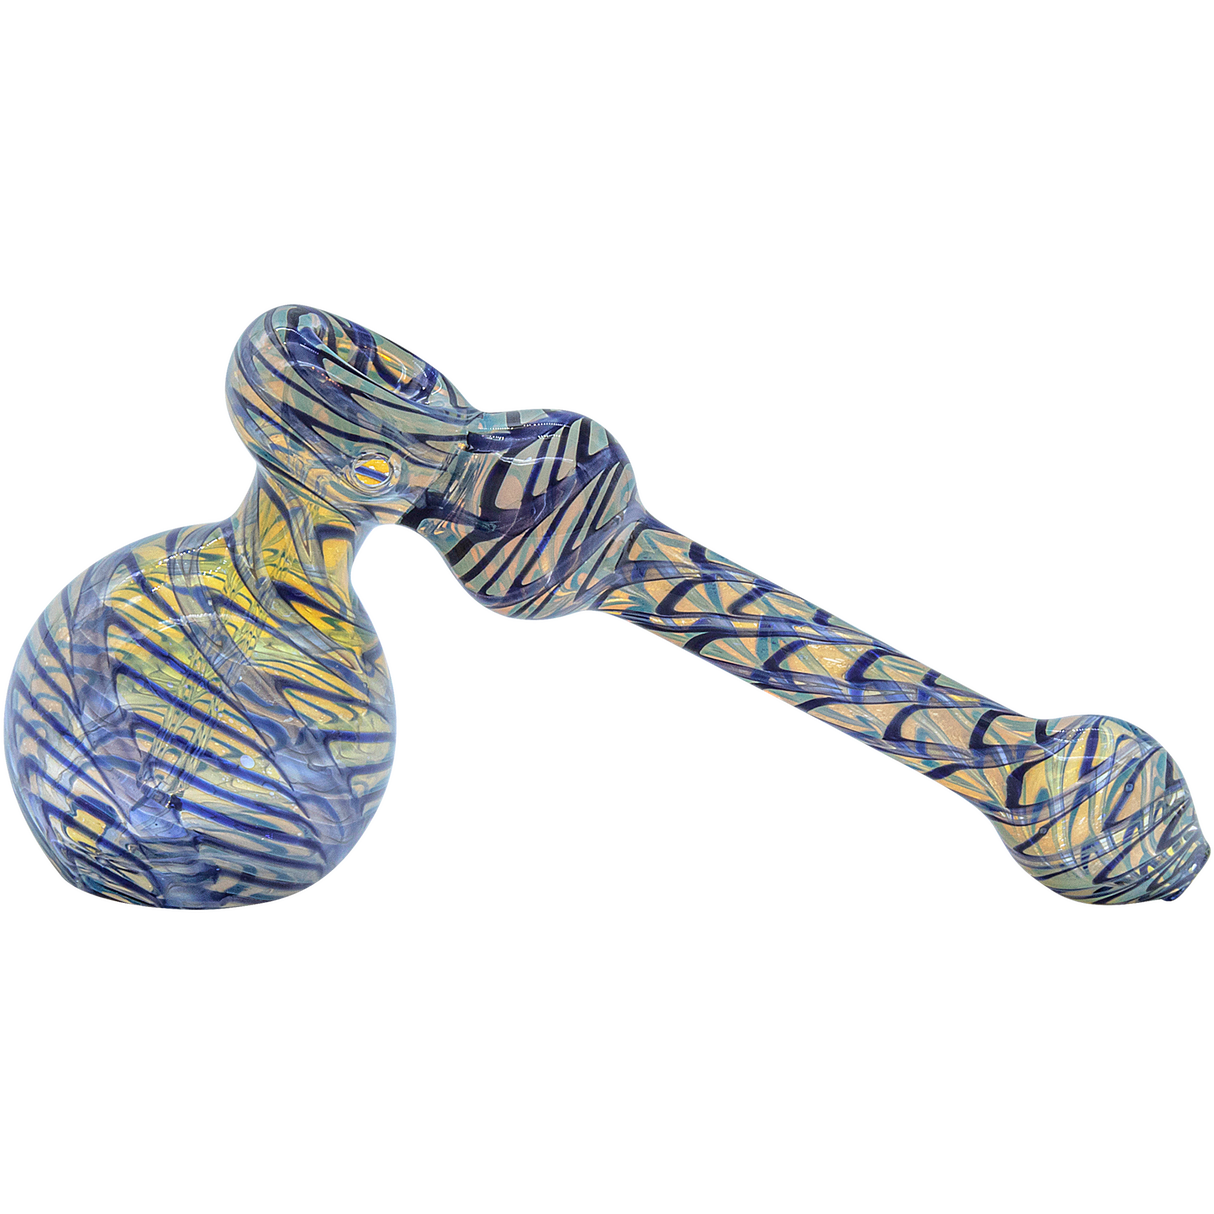 LA Pipes "Full Rake" Fumed Hammer Bubbler Pipe in blue and yellow swirls, 6" length, USA made